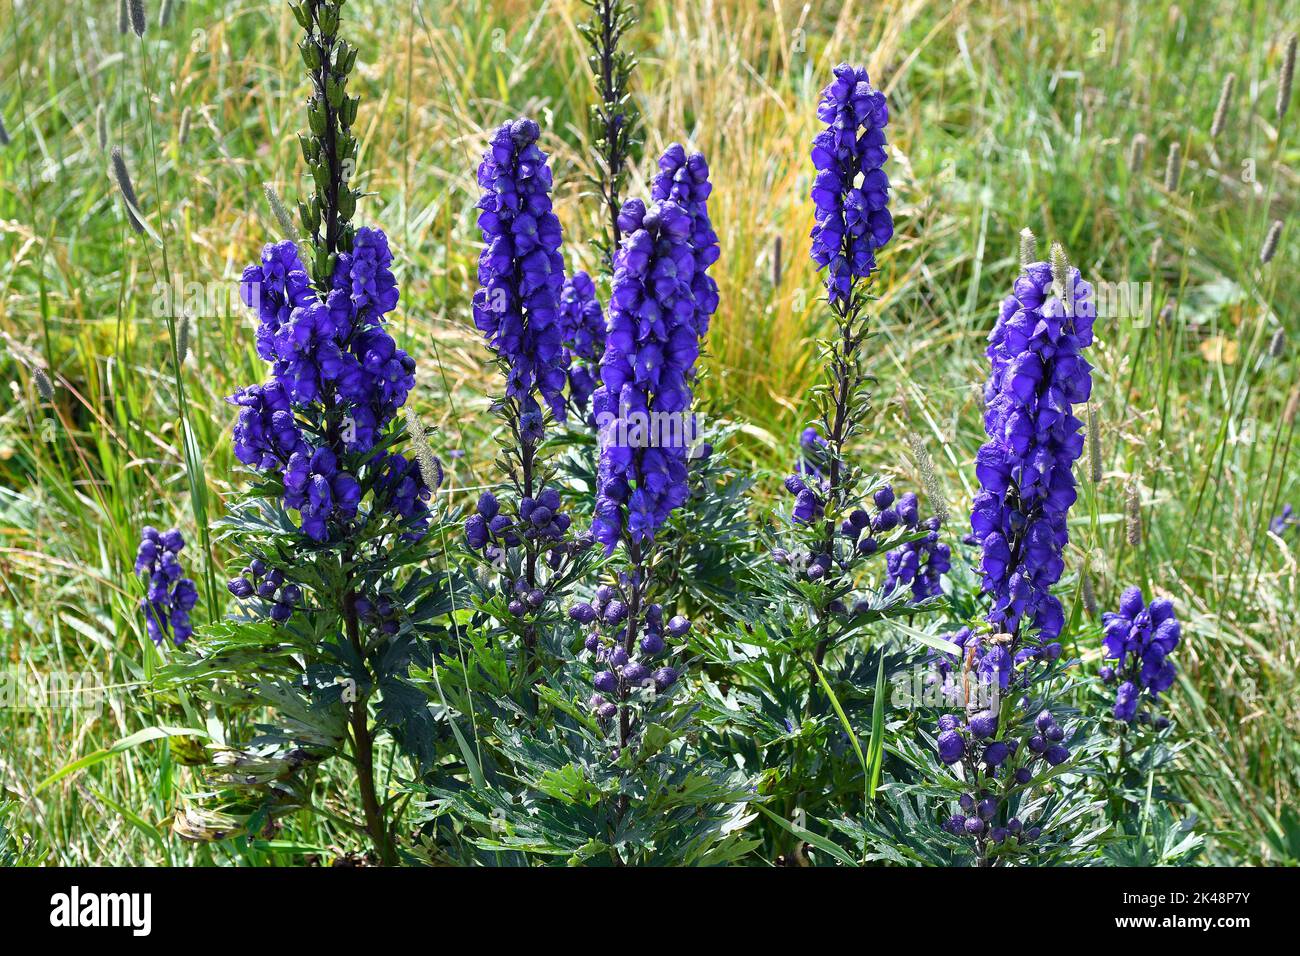 Monkshood flower - Aconitum napellus - is one of the most poisonous plants in Europe, but is also used as an ornamental plant and in medicine Stock Photo